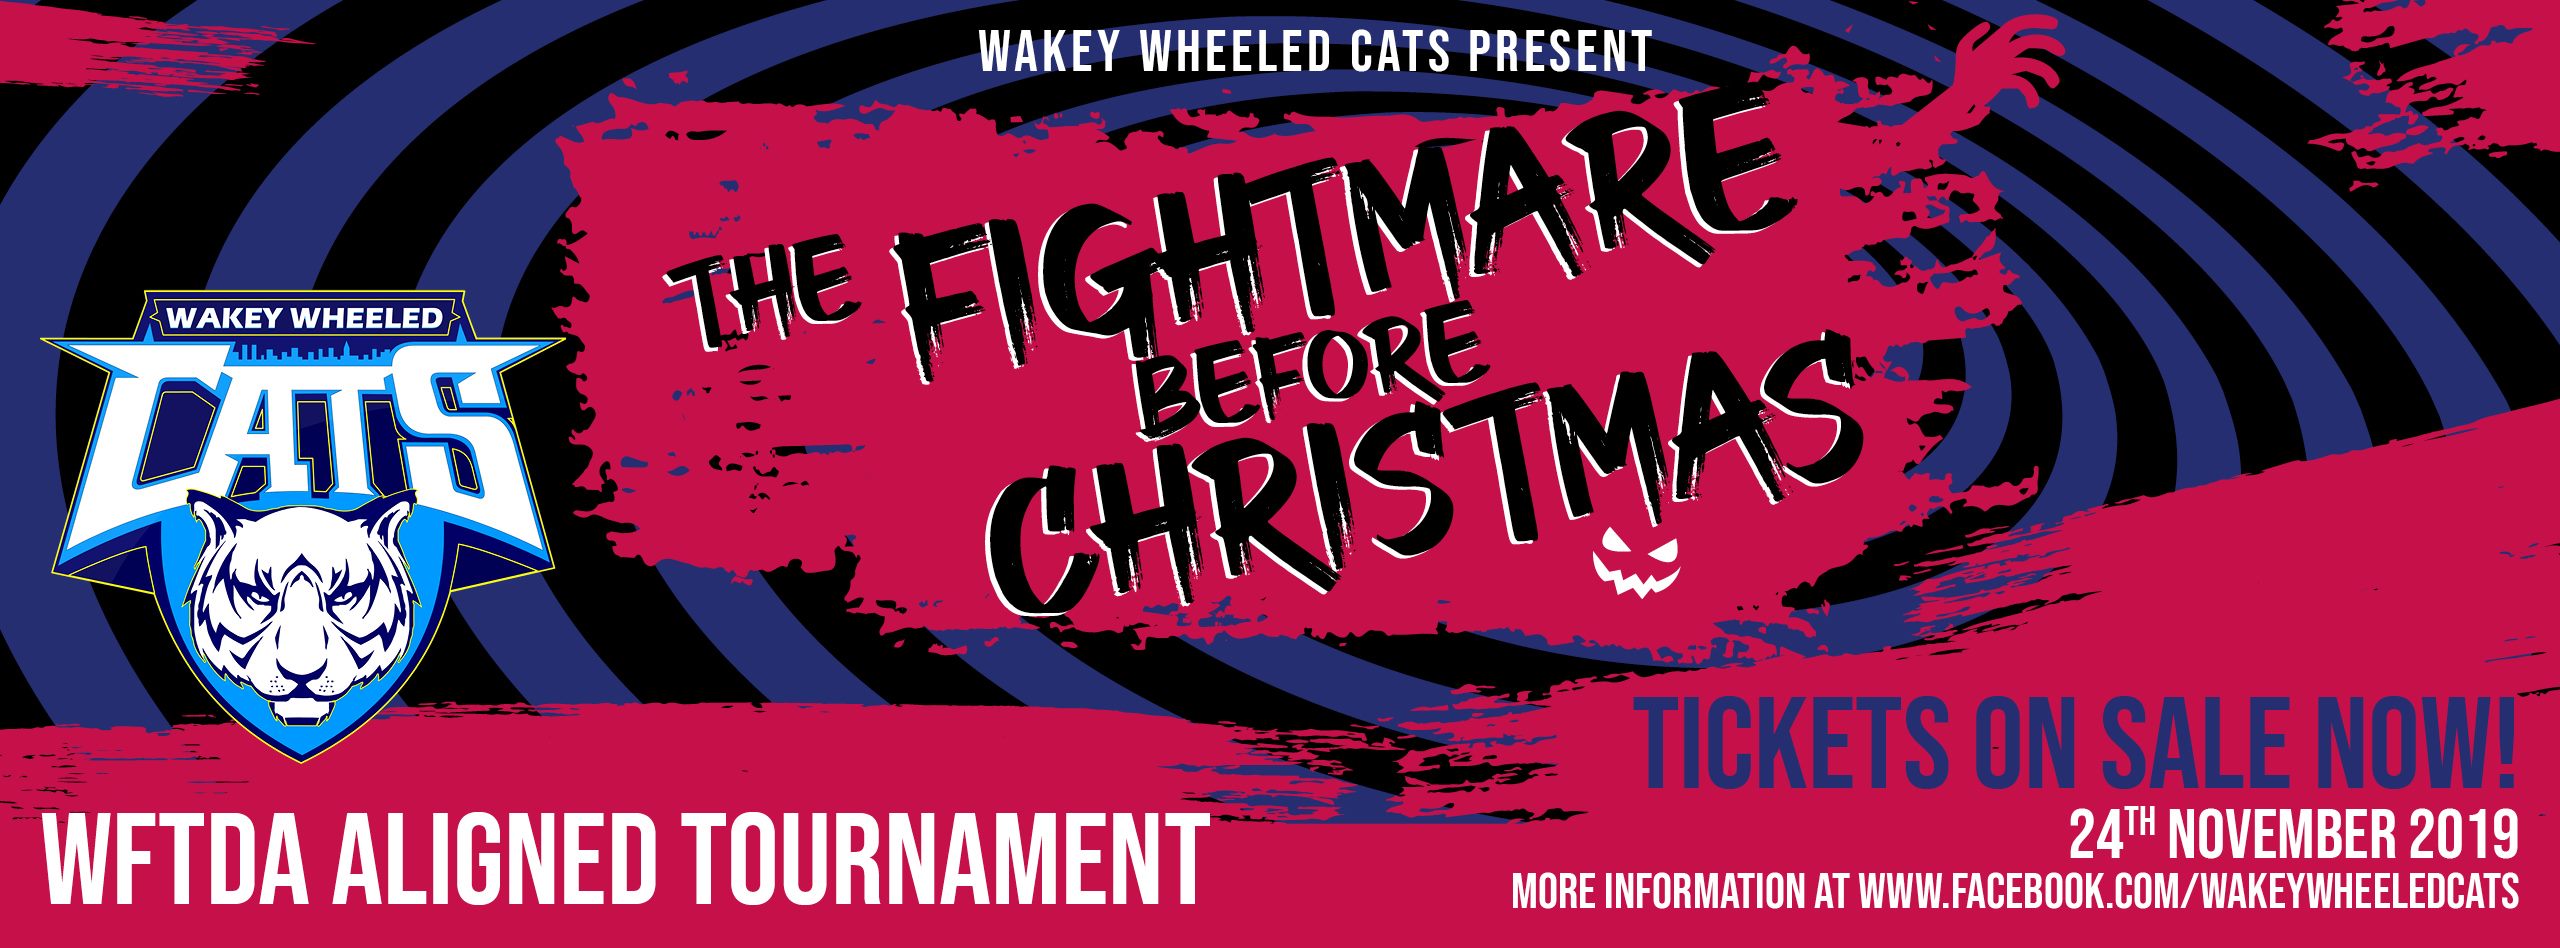 Fightmare Before Christmas Roller Derby tournament